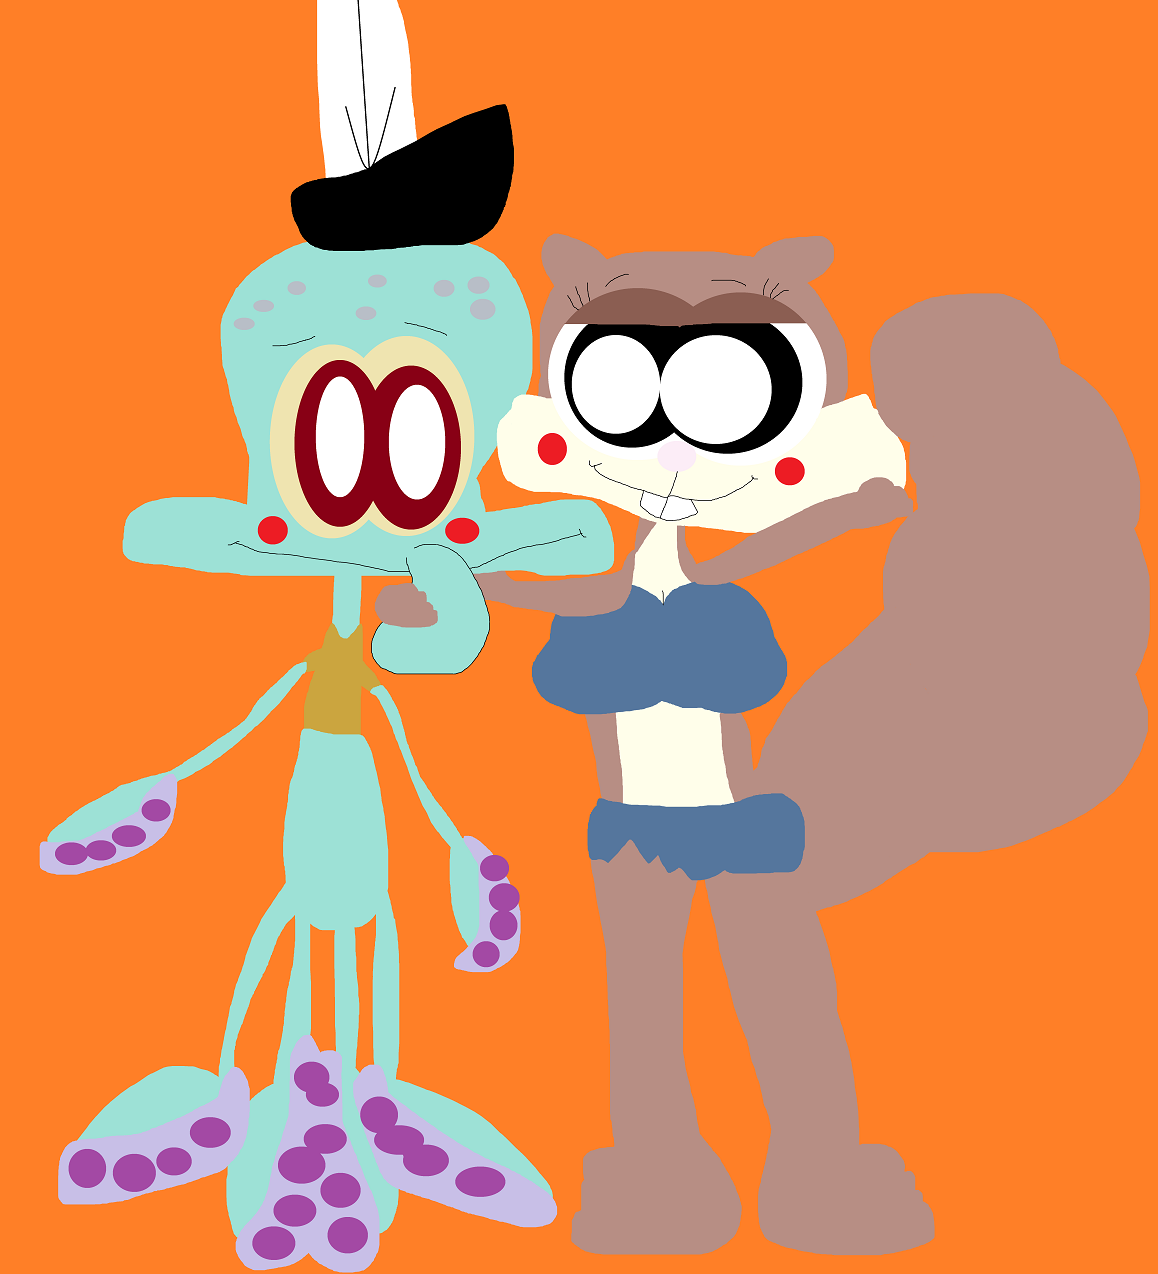 Sandy is About To kiss Squidward Again by Falconlobo